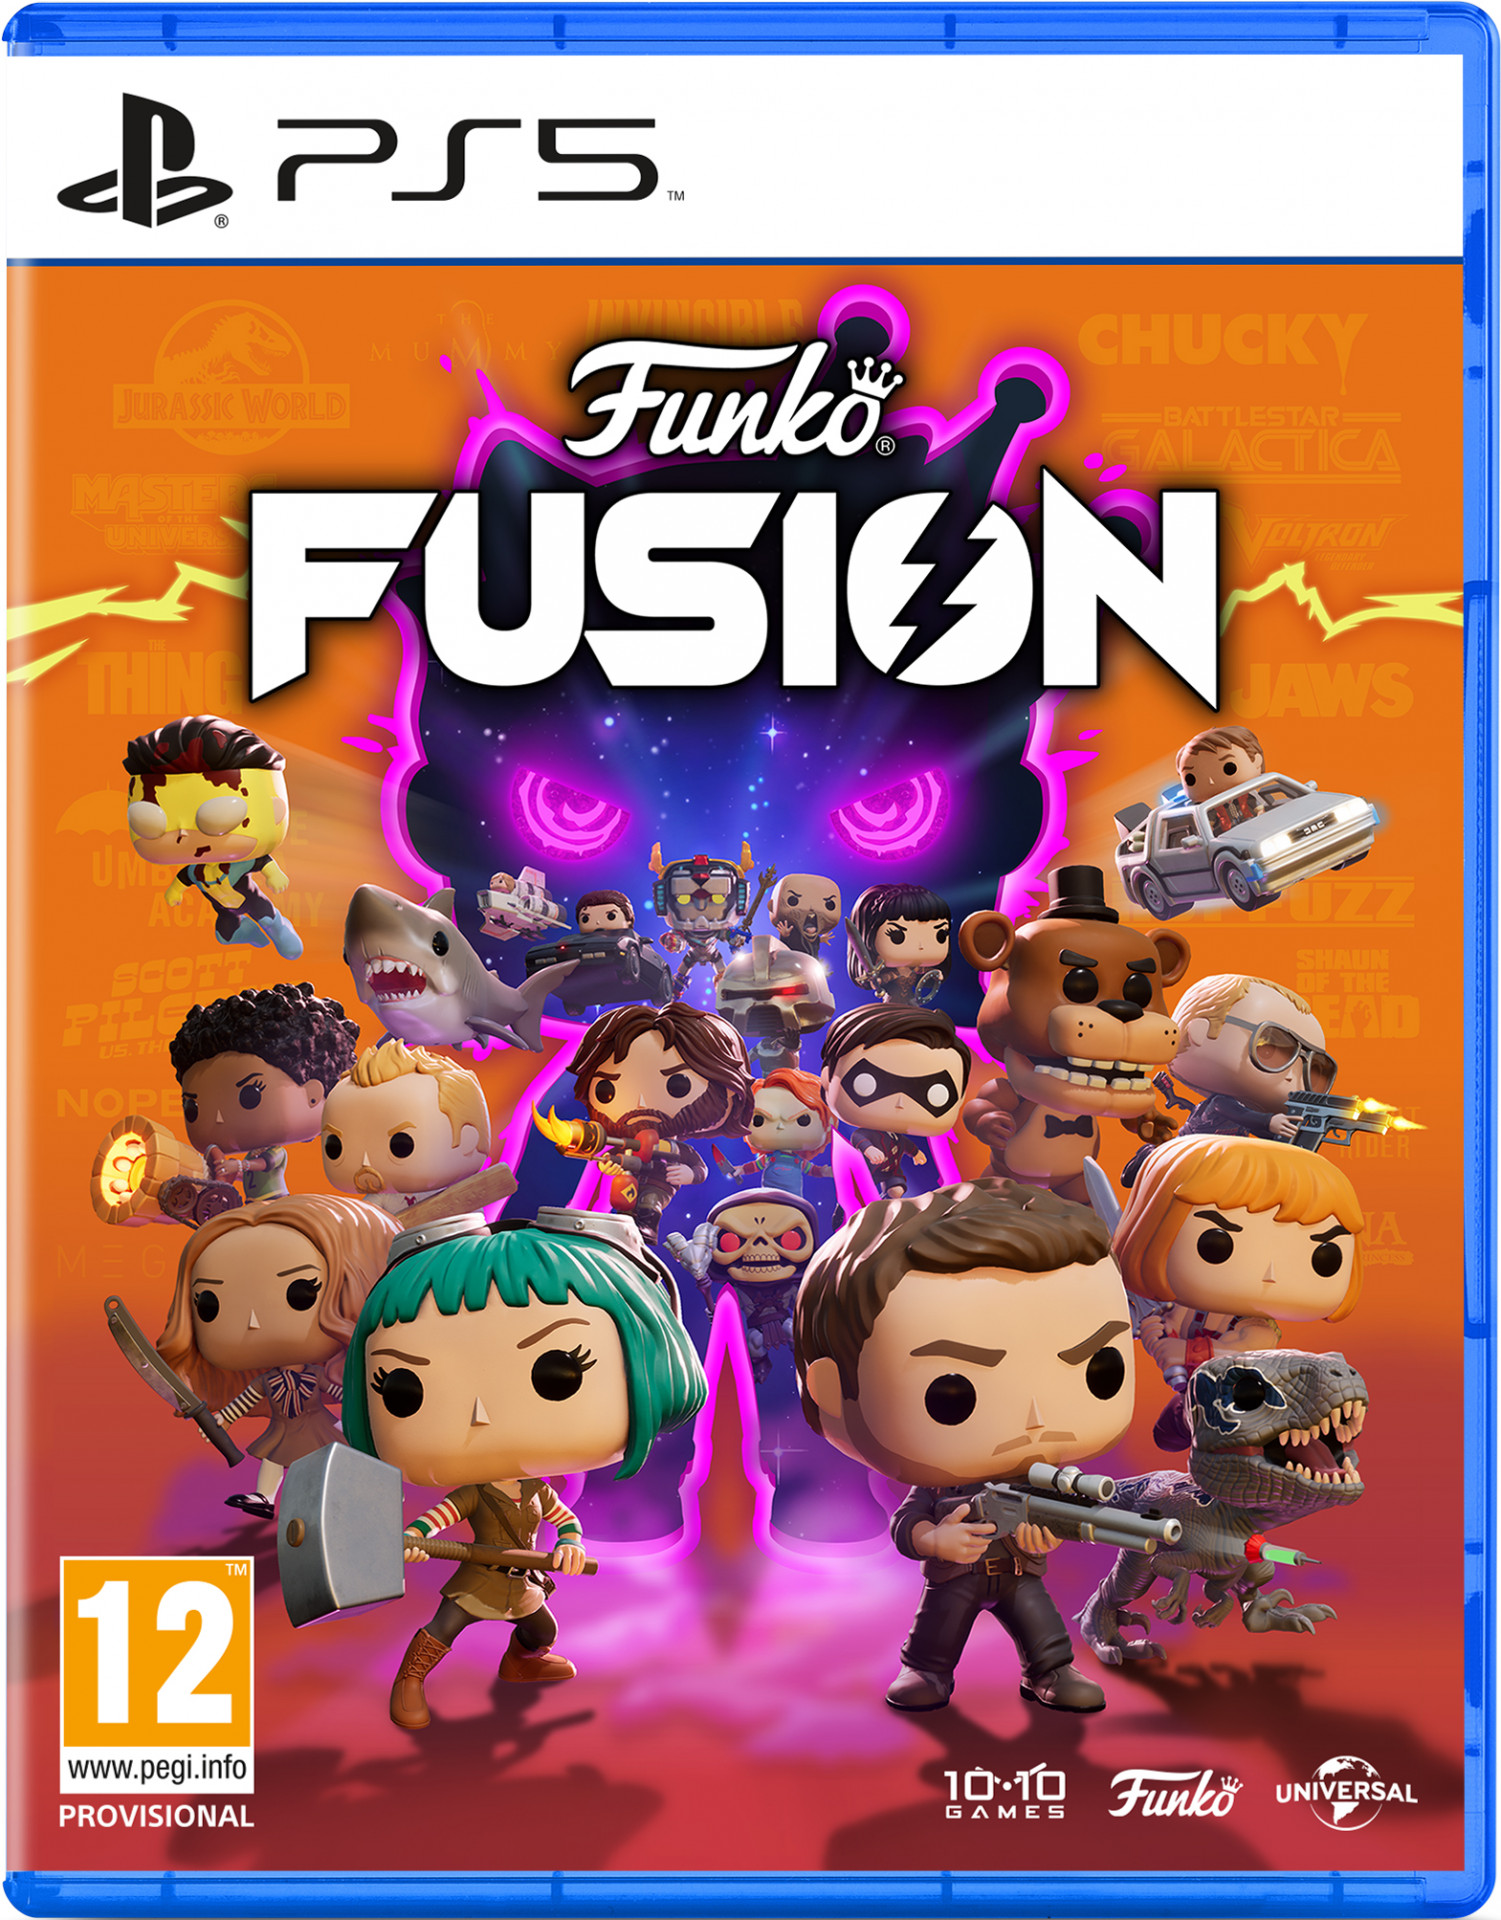 Funko Fusion (PS5), 10:10 Games Limited